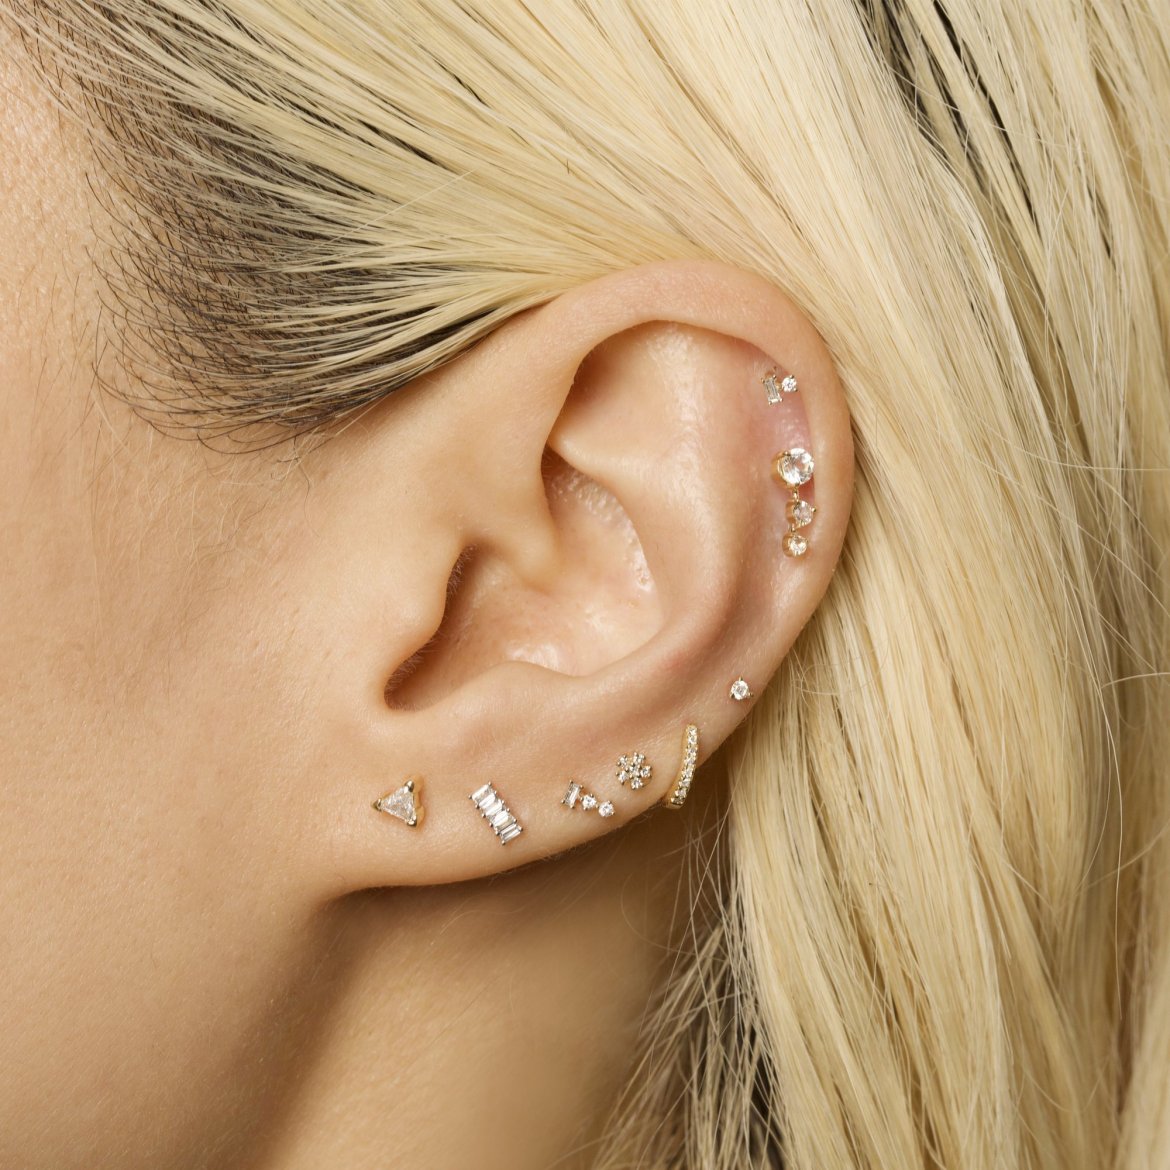 Detail Ear Piercing Knoxville Nomer 21